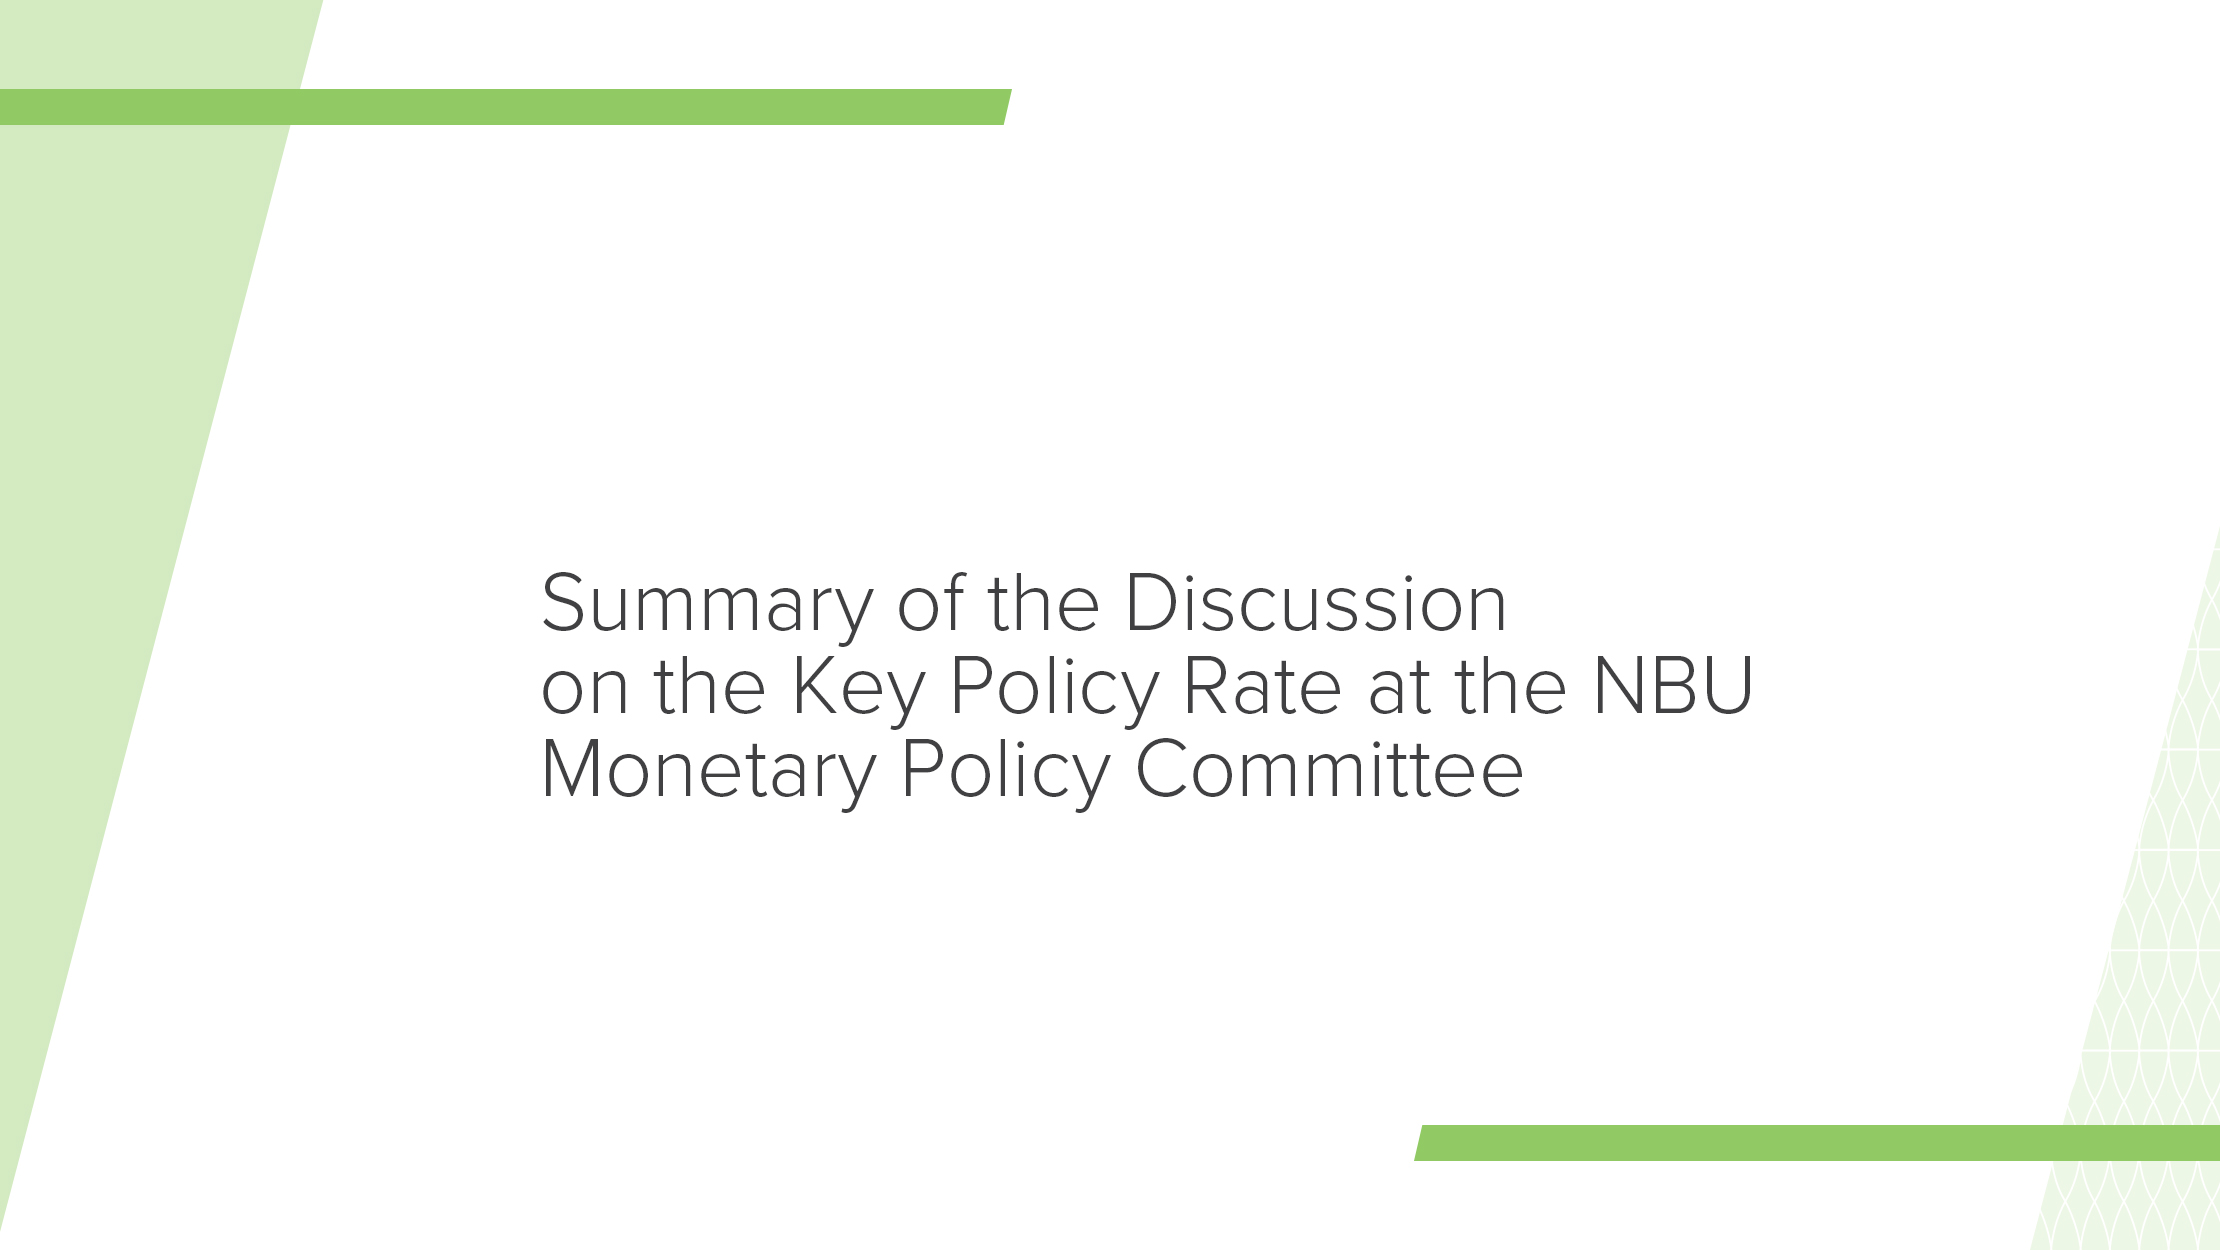 Summary of Key Policy Rate Discussion by NBU Monetary Policy Committee on 19 October 2022